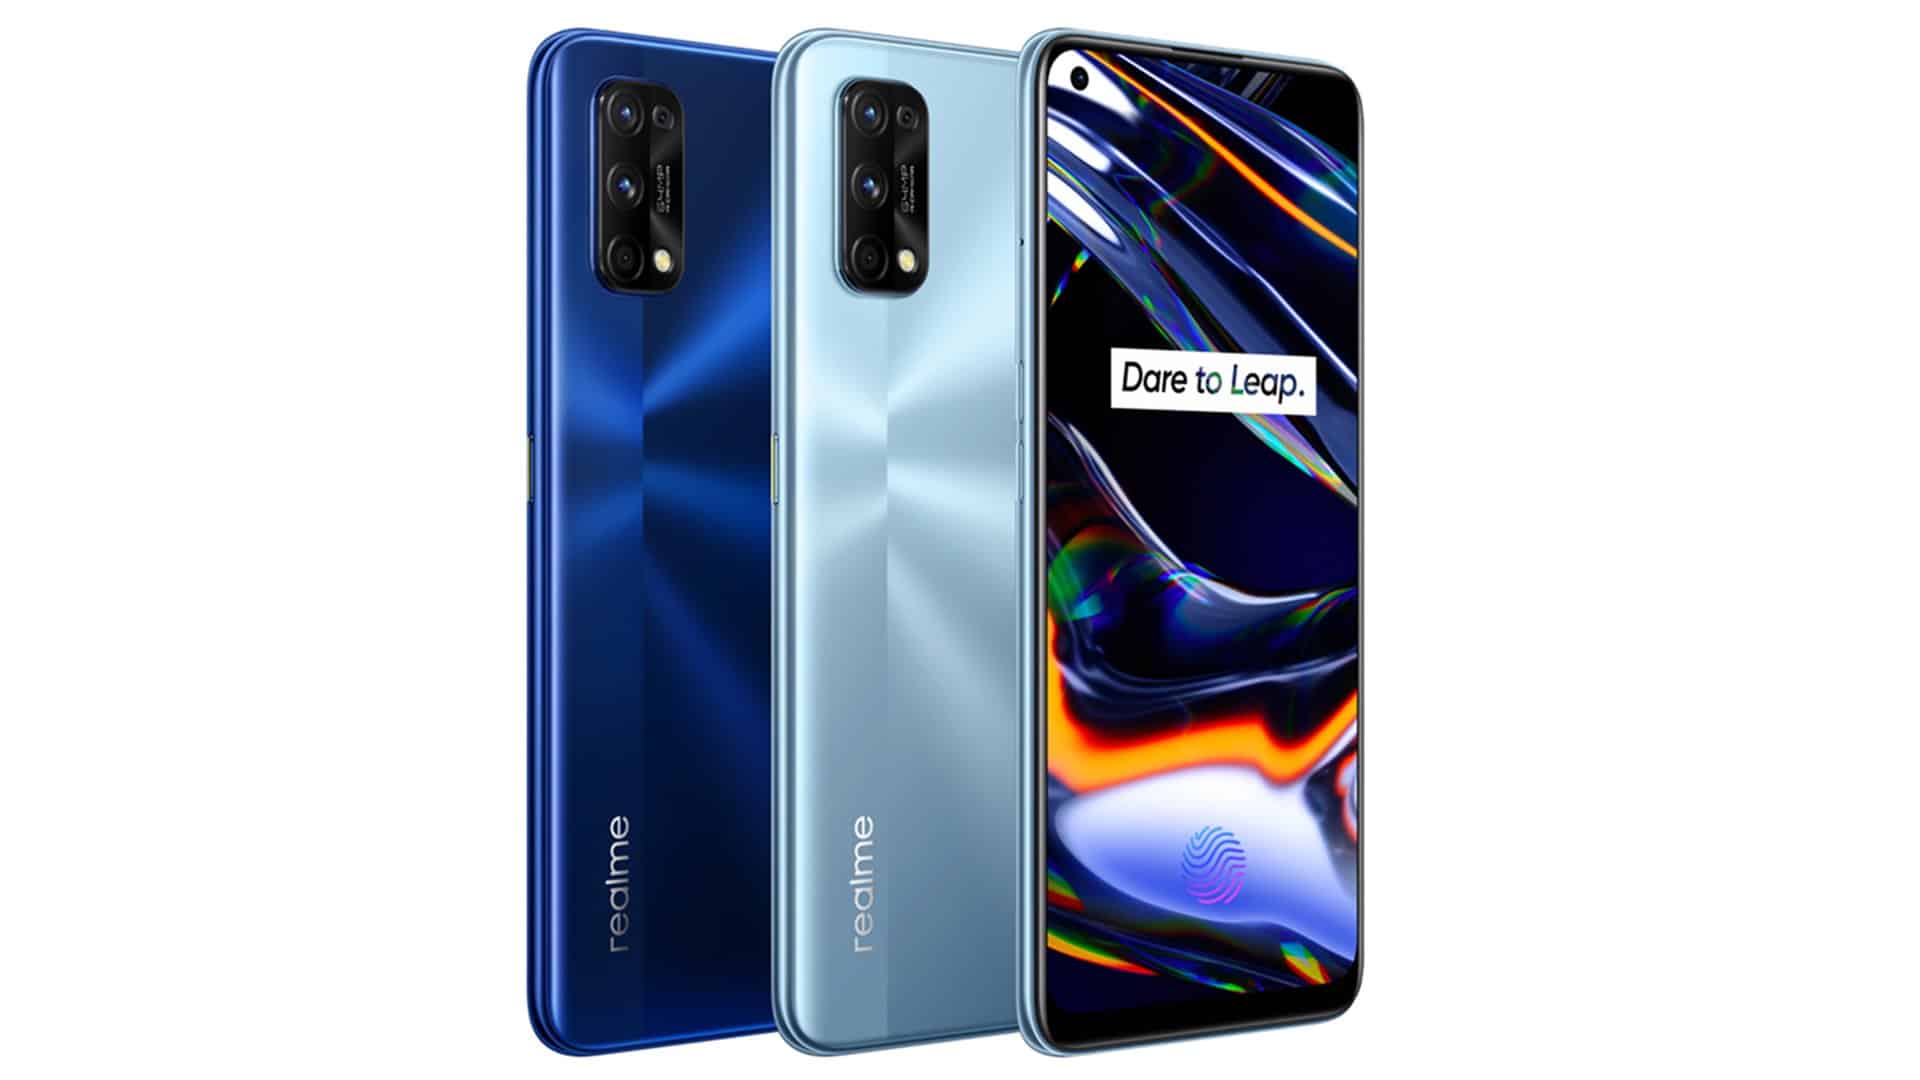 Realme logs sale of Rs 3,500 cr in 9-day festive sale